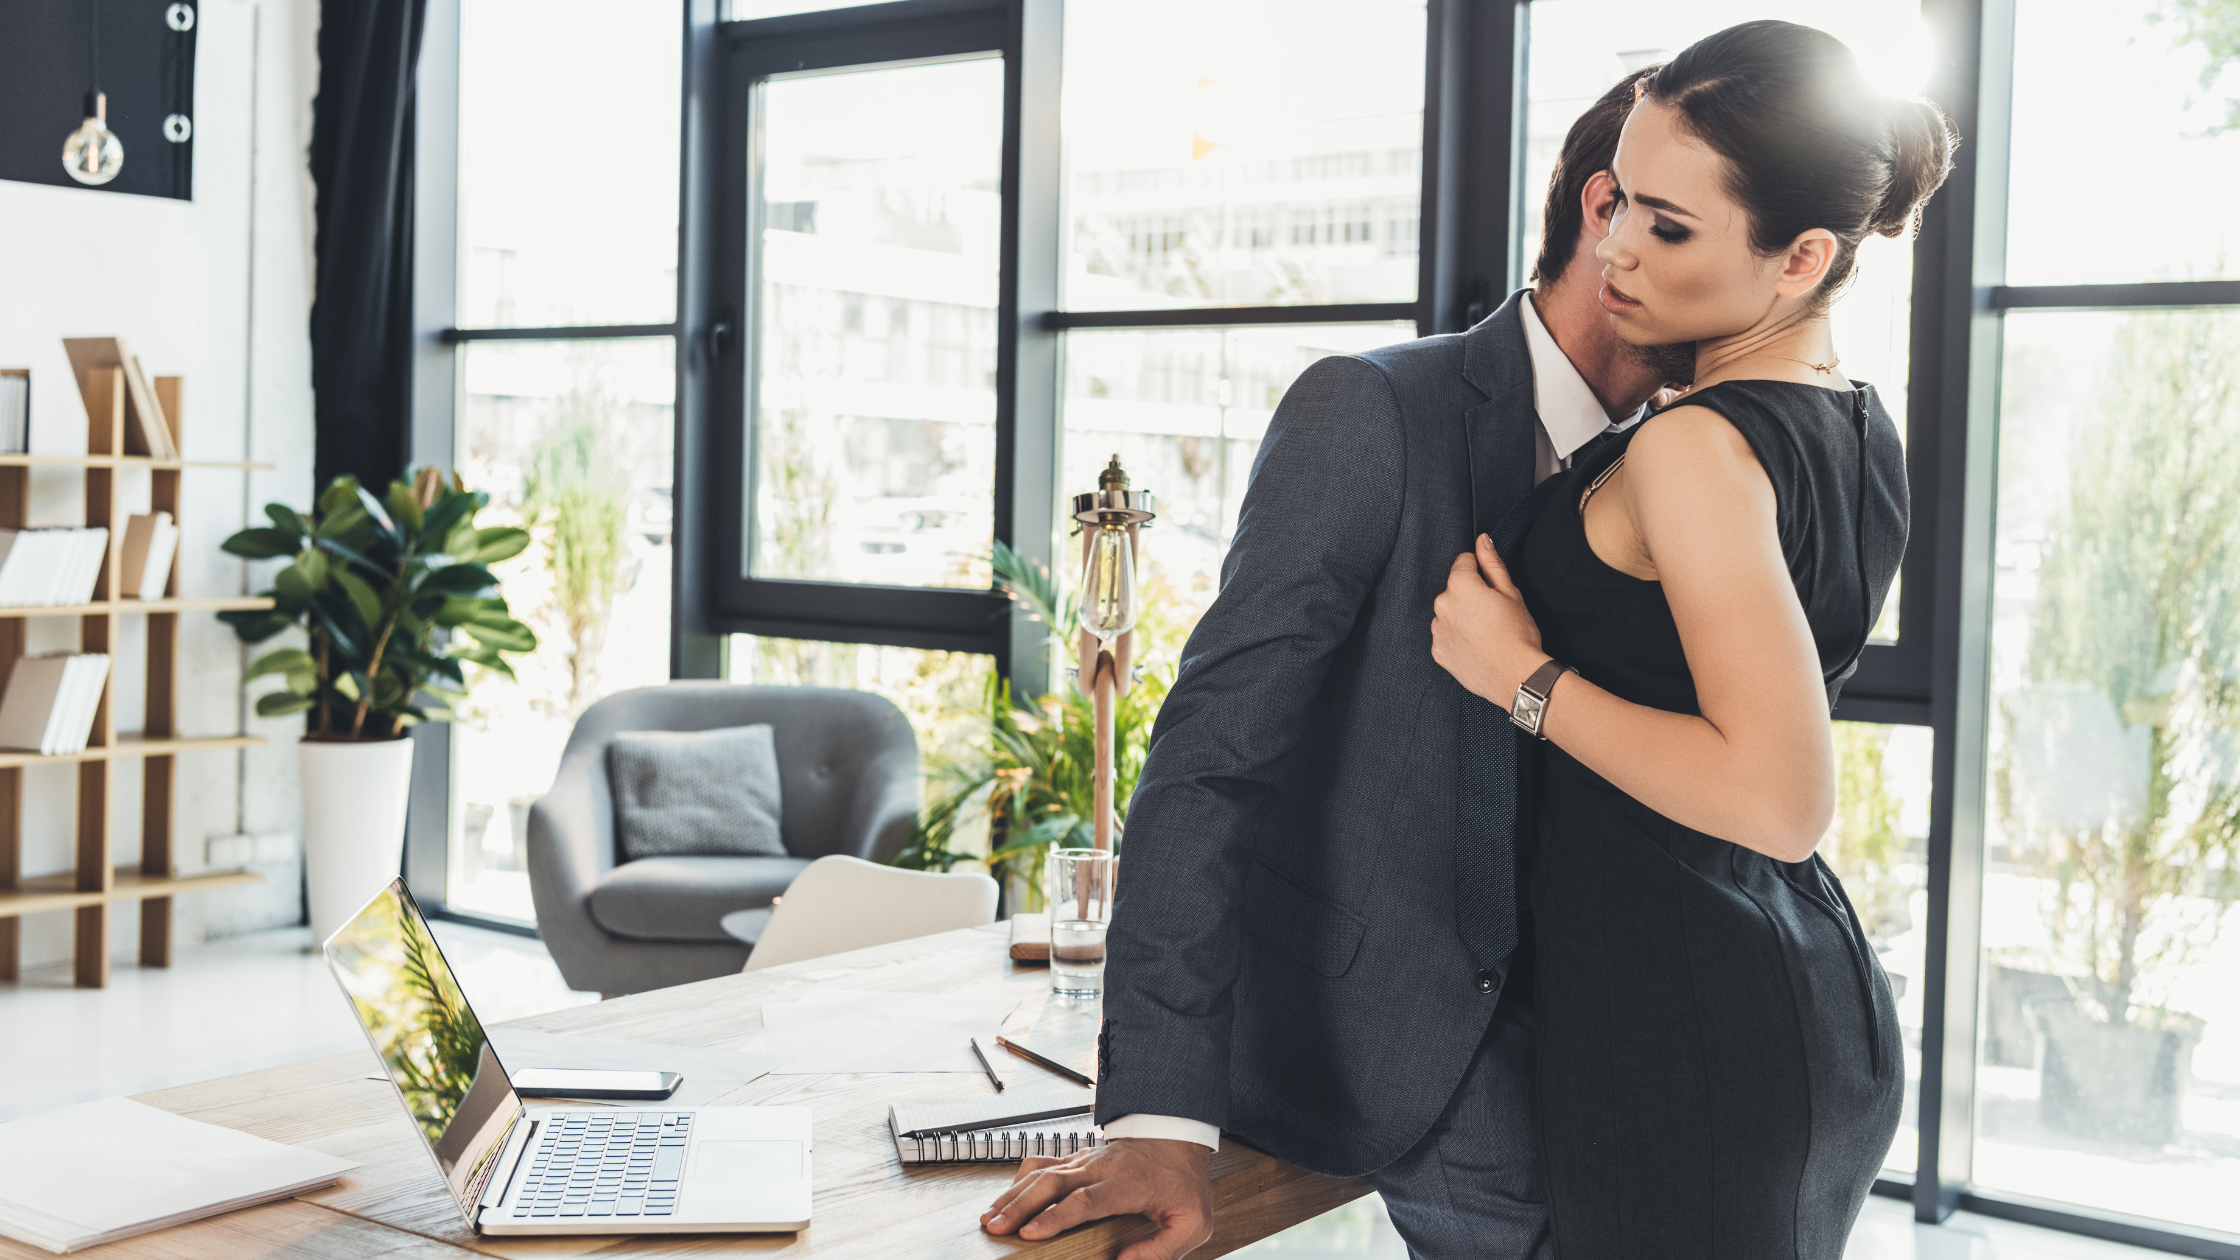 5 Places To Make Out In The Workplace